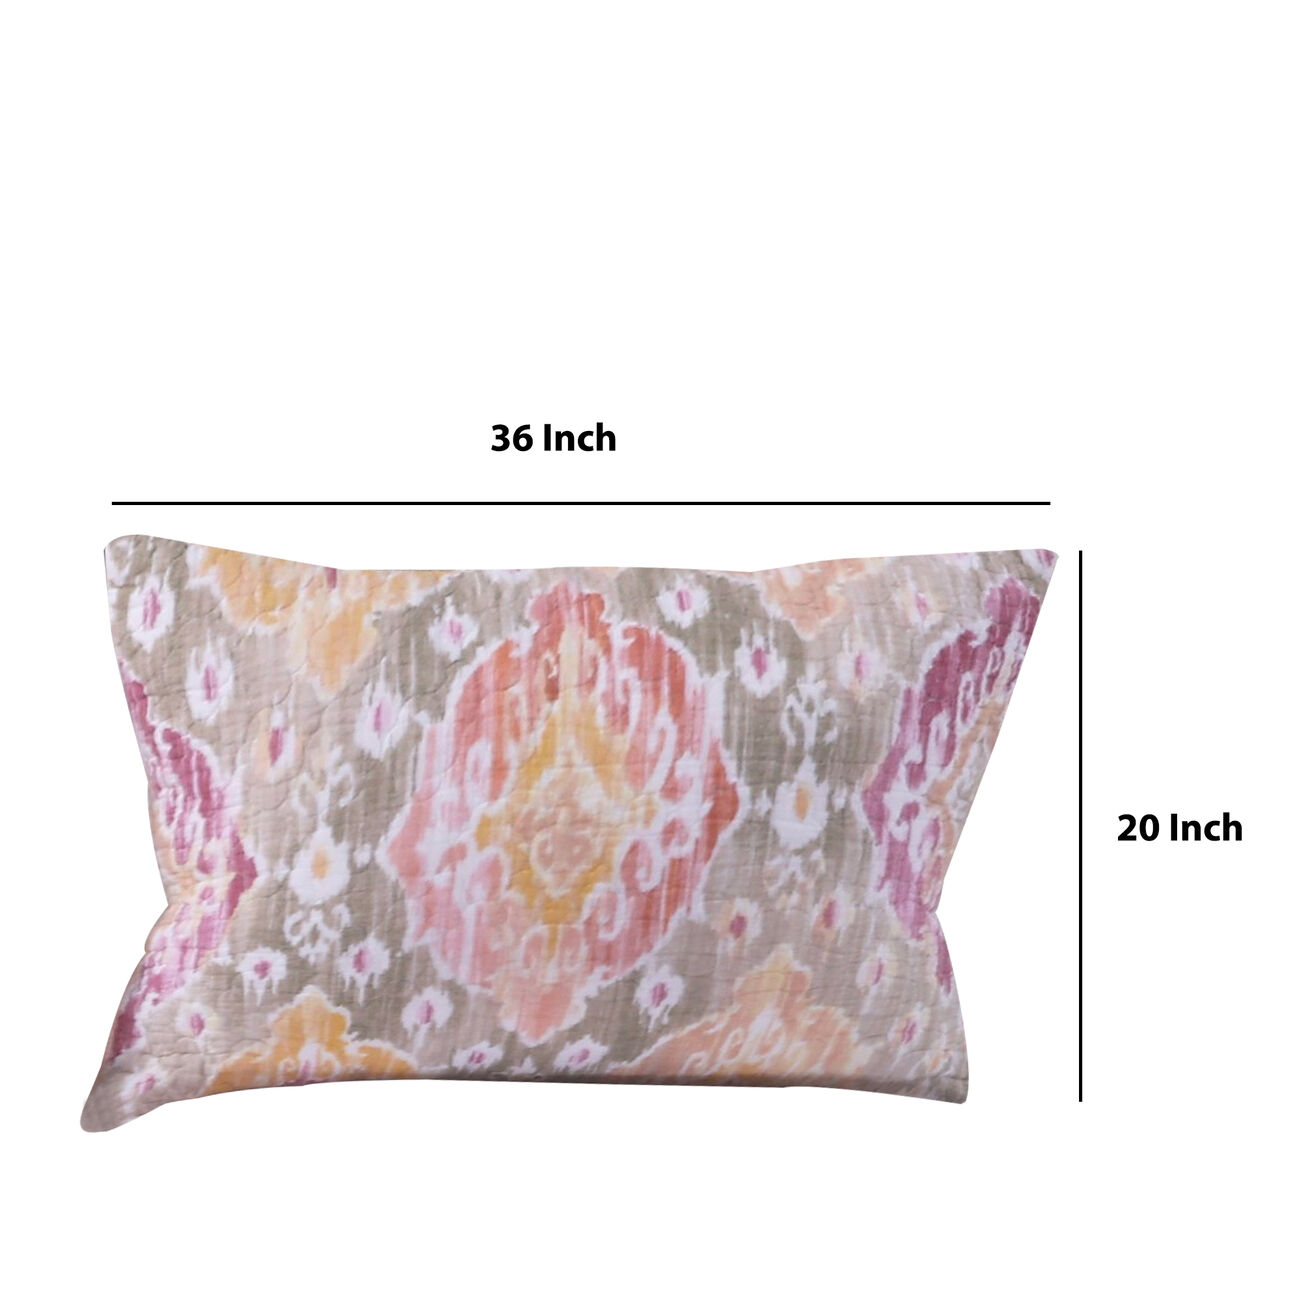 Fabric King Size Pillow Sham with Medallion Pattern, Multicolor